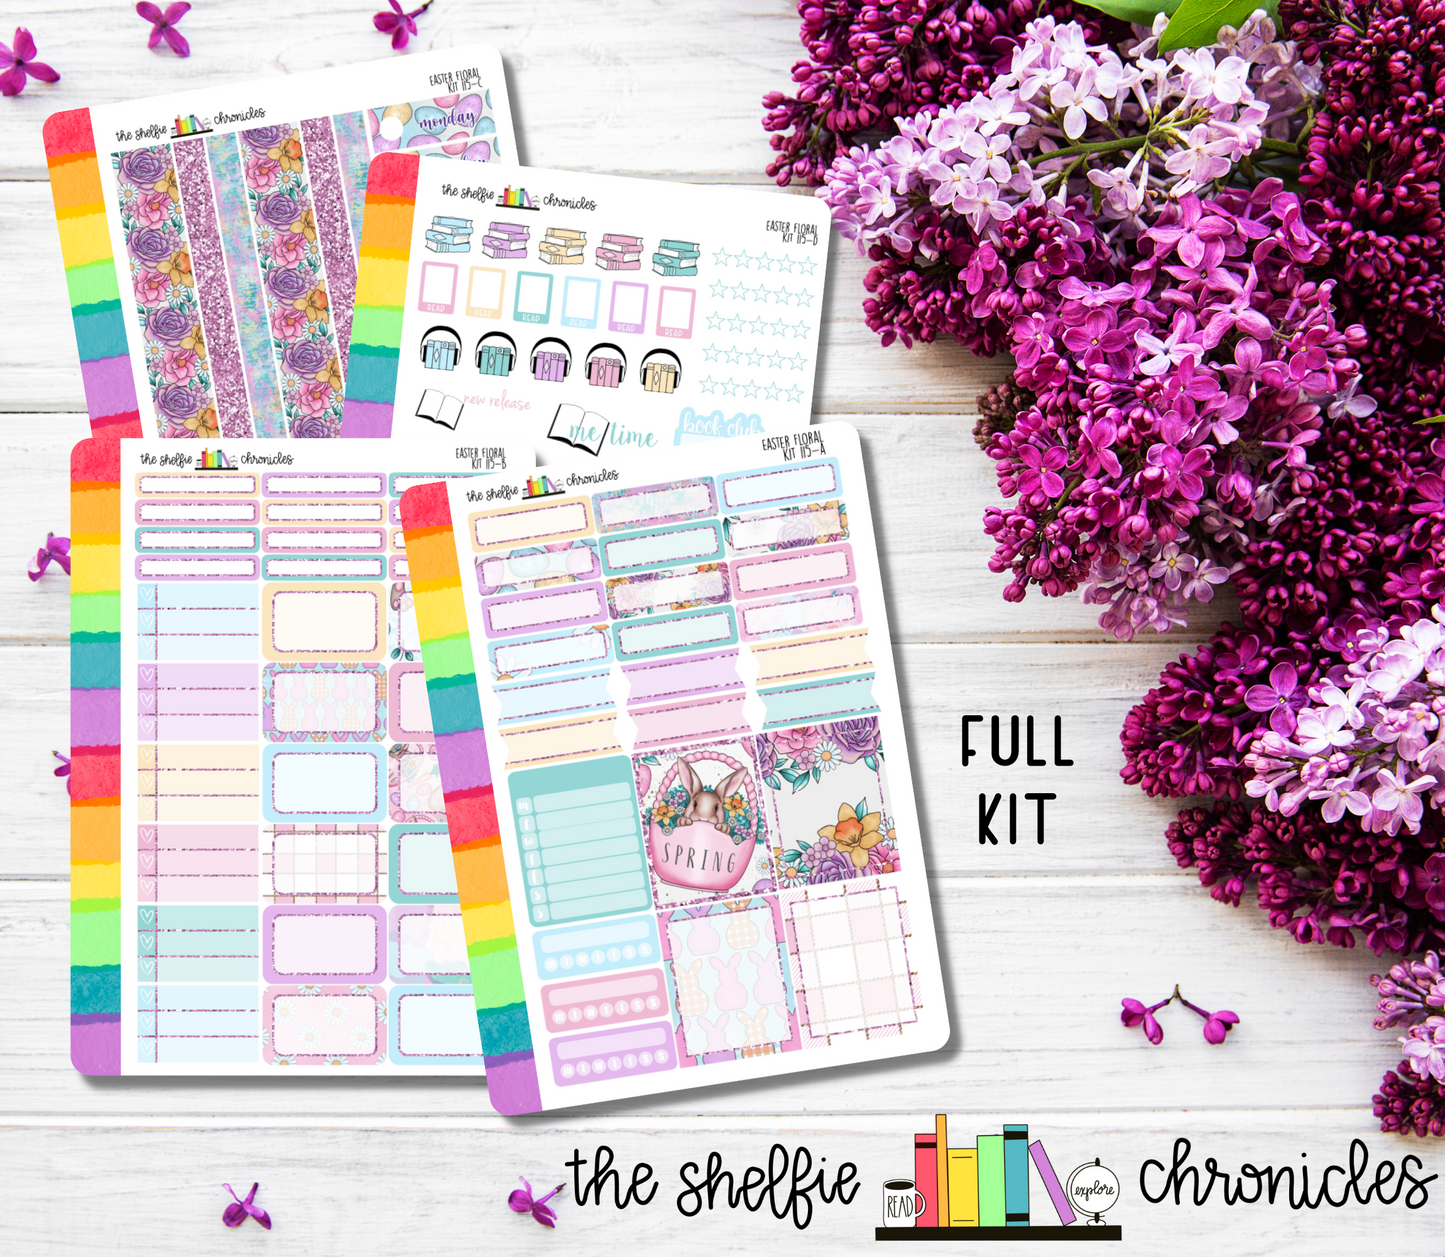 Kit 115 - Easter Floral Weekly Kit - Die Cut Stickers - Repositionable Paper - Made To Fit 7x9 Planners